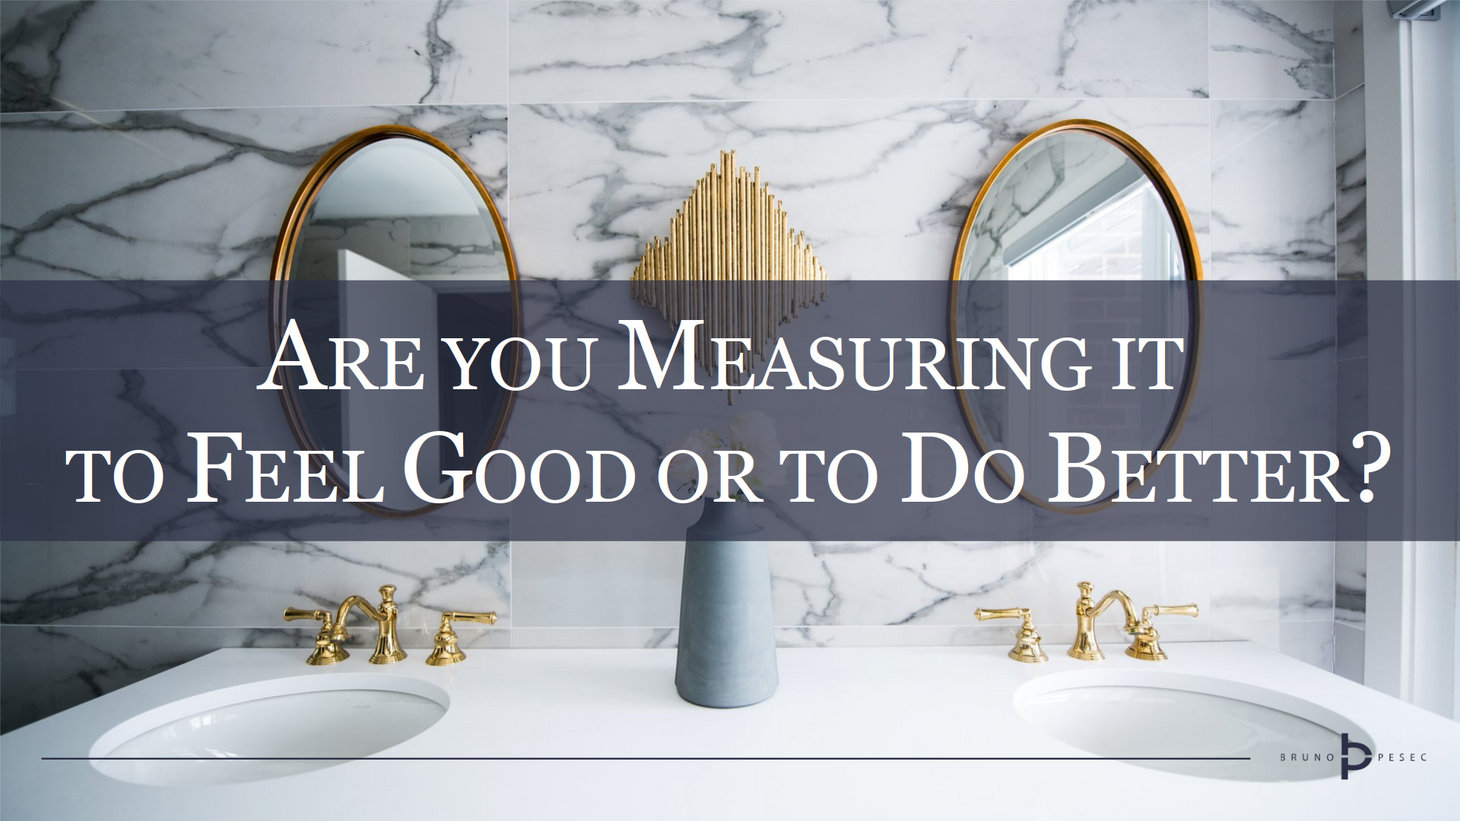 Are you measuring it to feel good or to do better?